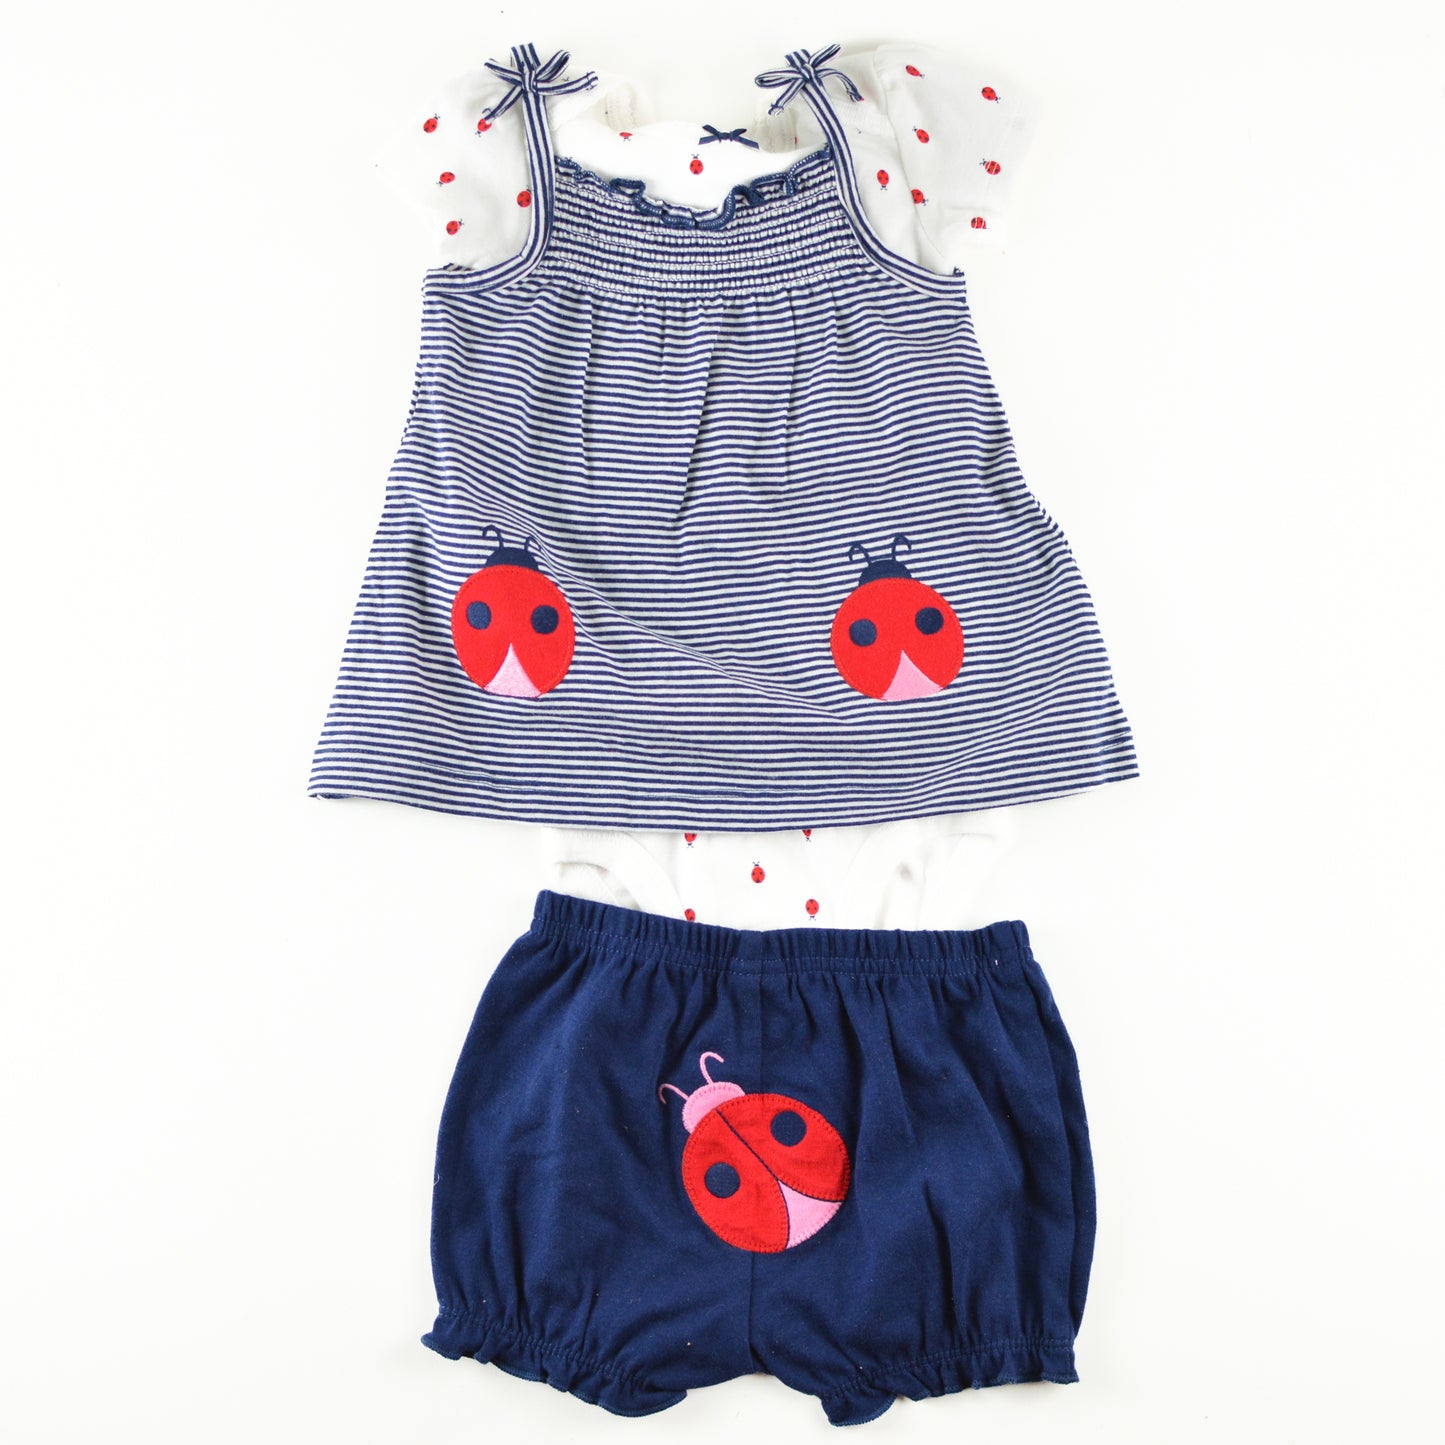 Lady Bug Outfit 12 months